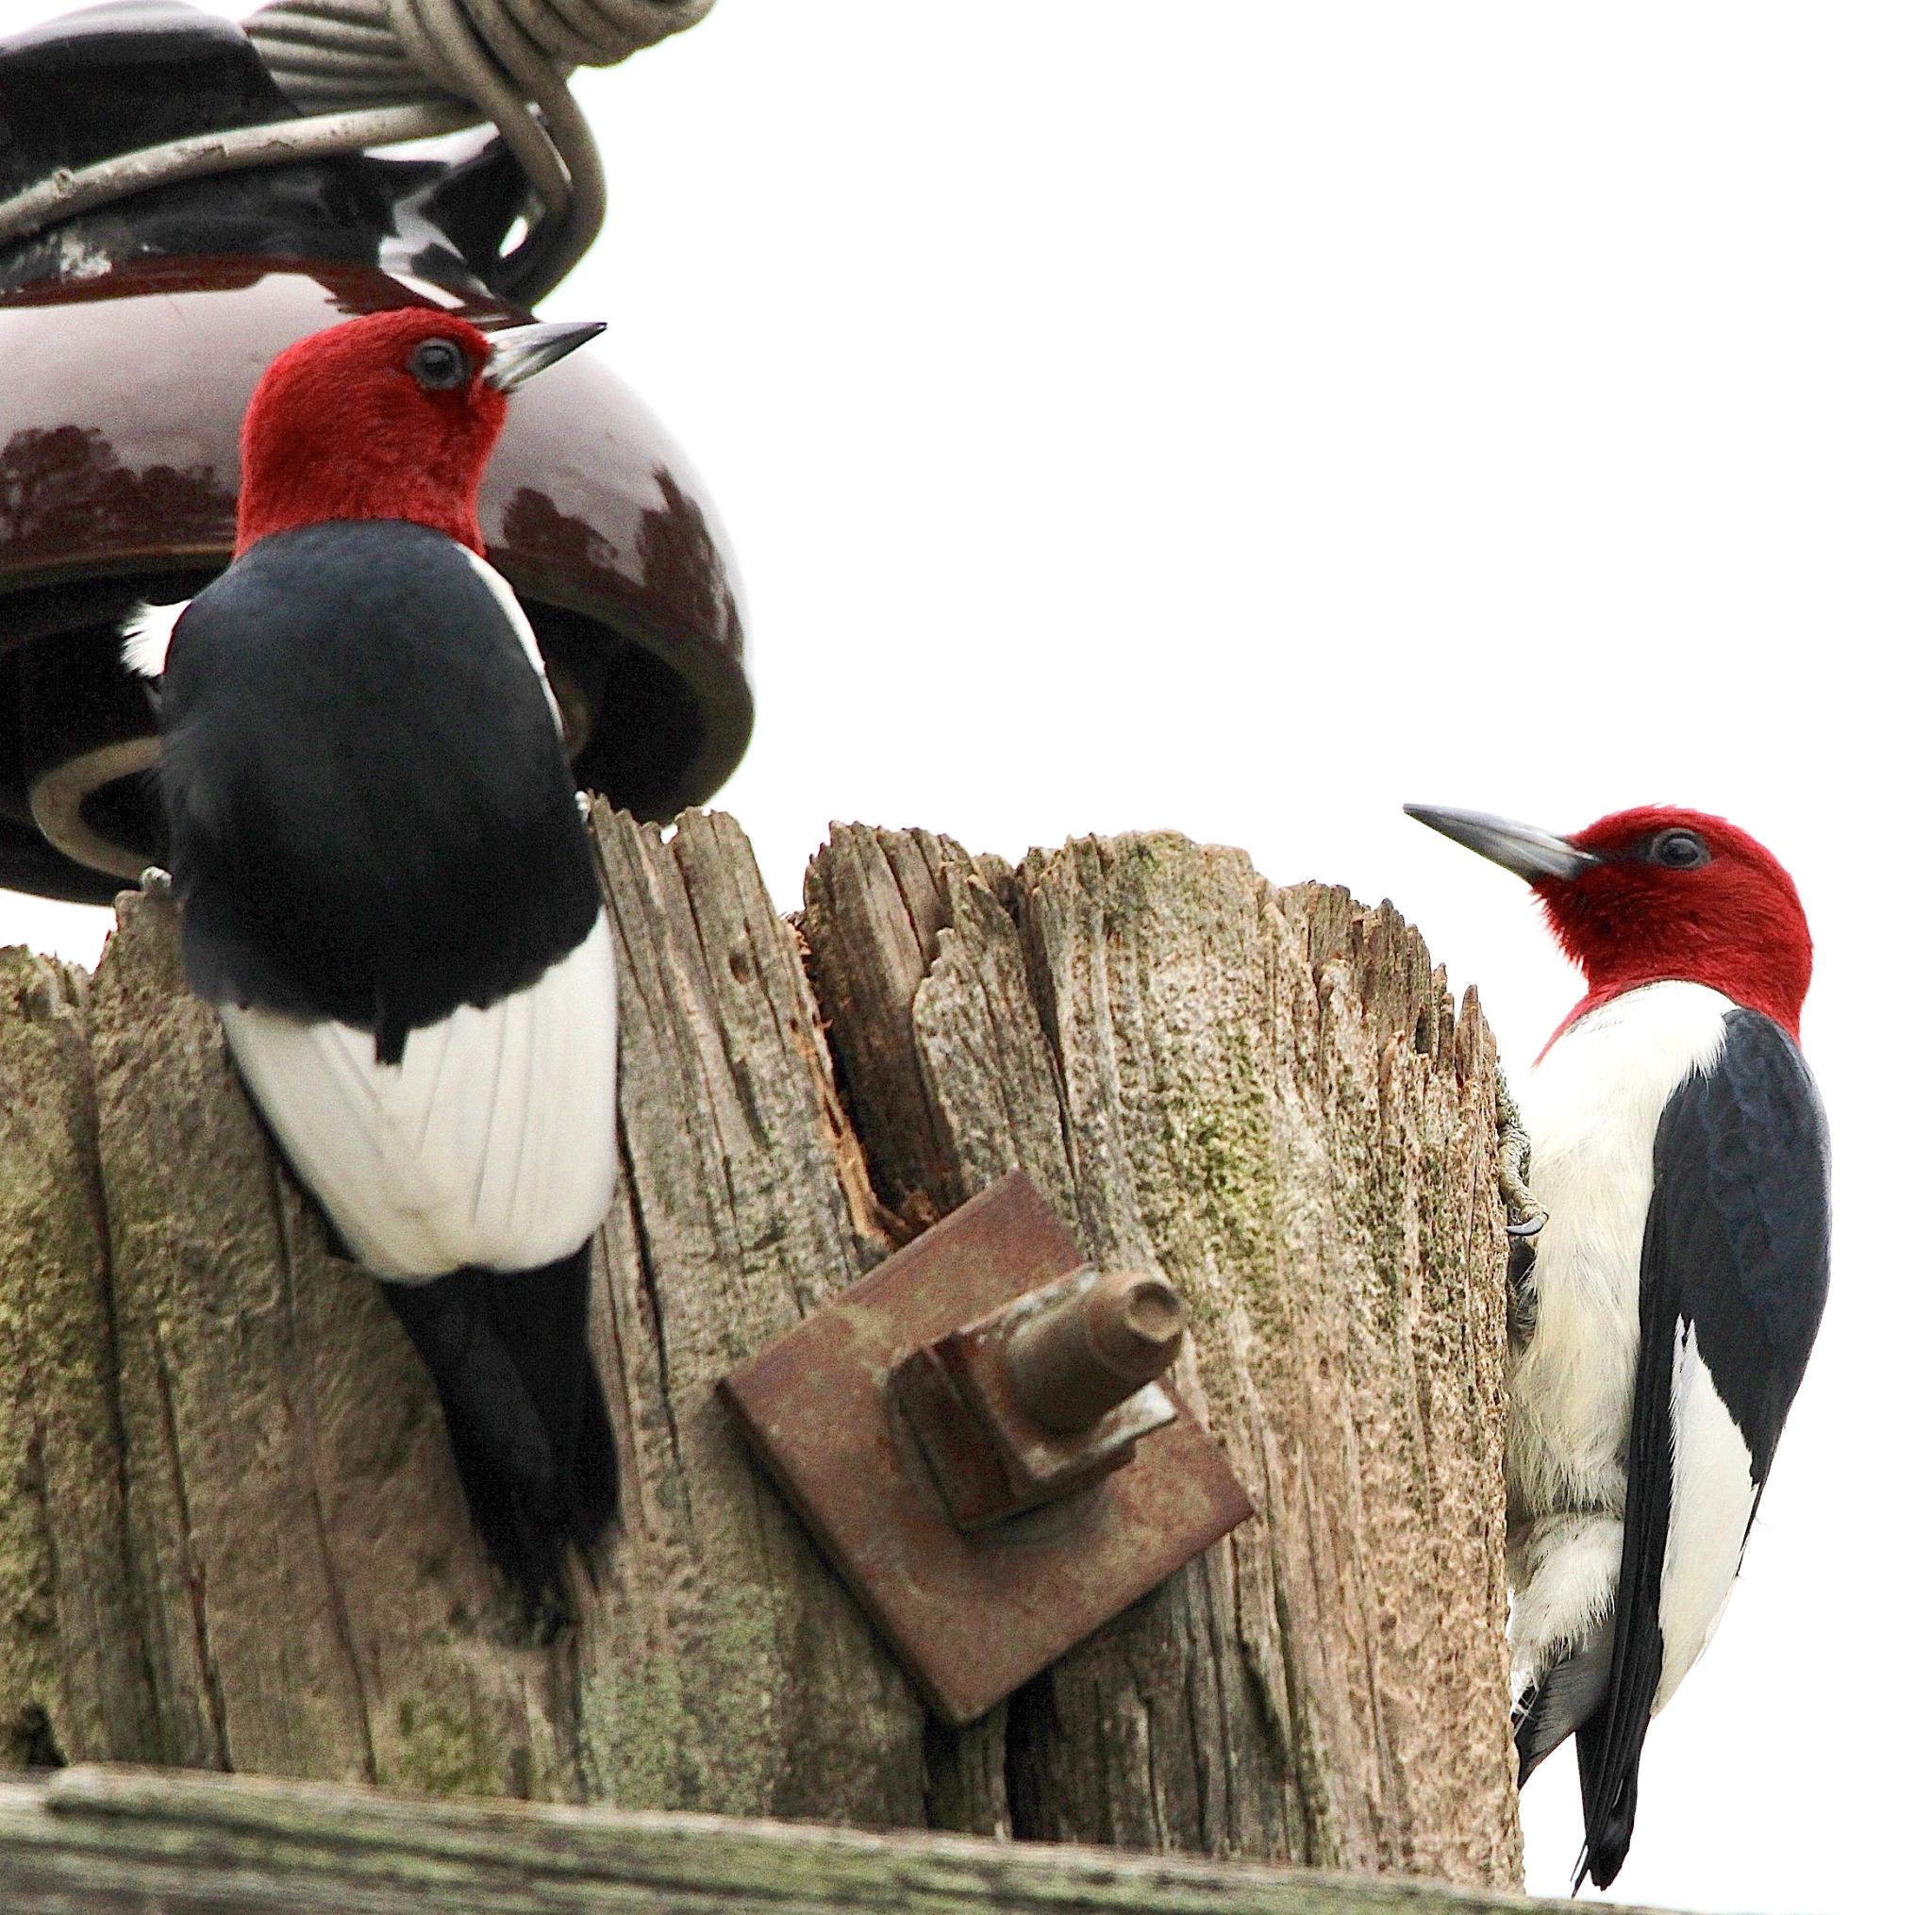 The Red-headed Woodpecker